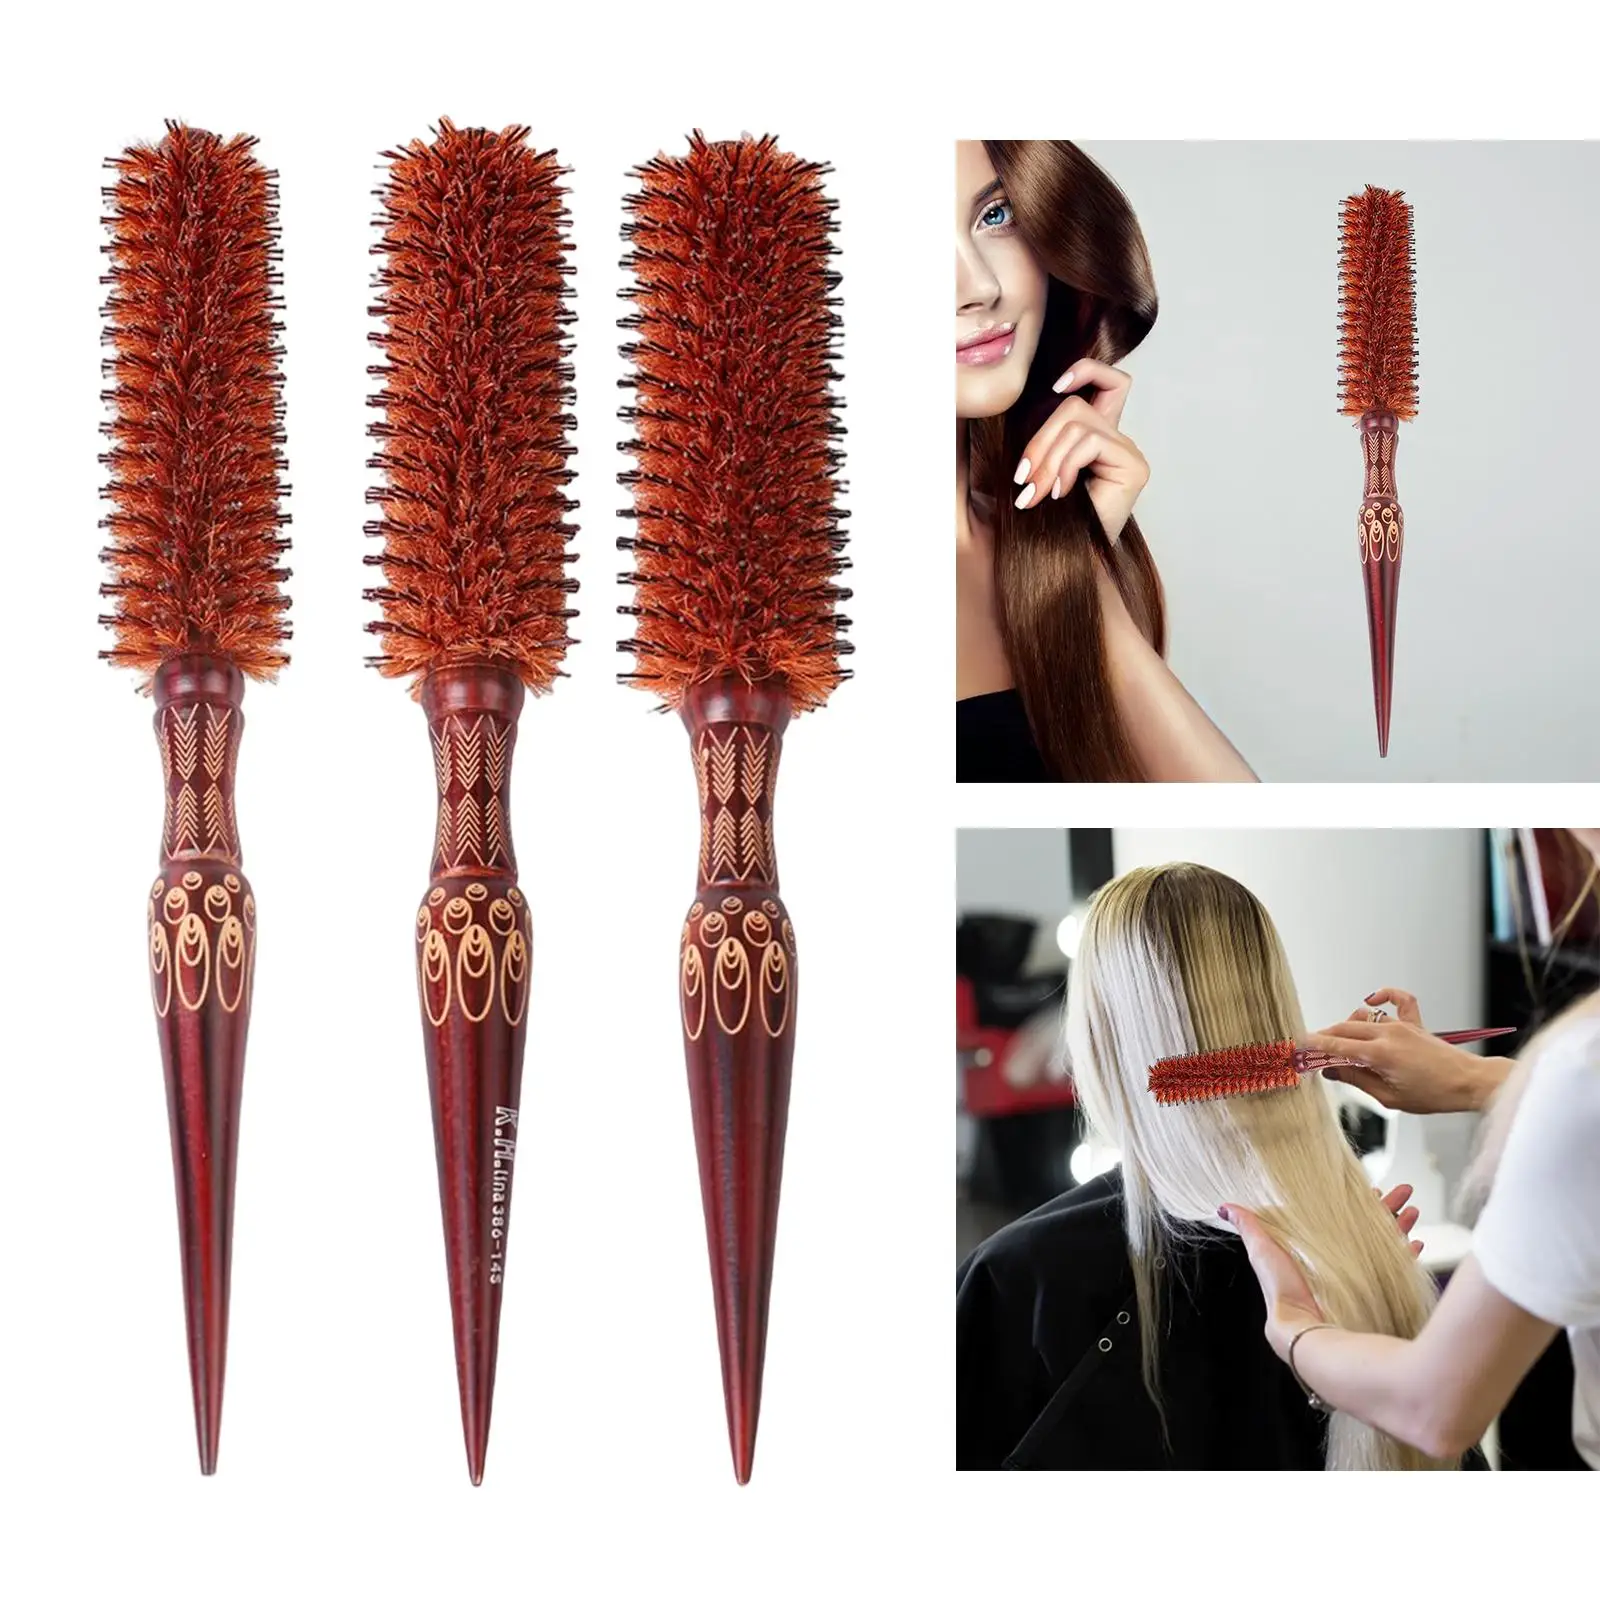 Round Hair Brush Light Weight High Temperature Resistant Wood Handle Hairbrush for Heat Styling Blow Drying Barber Salon